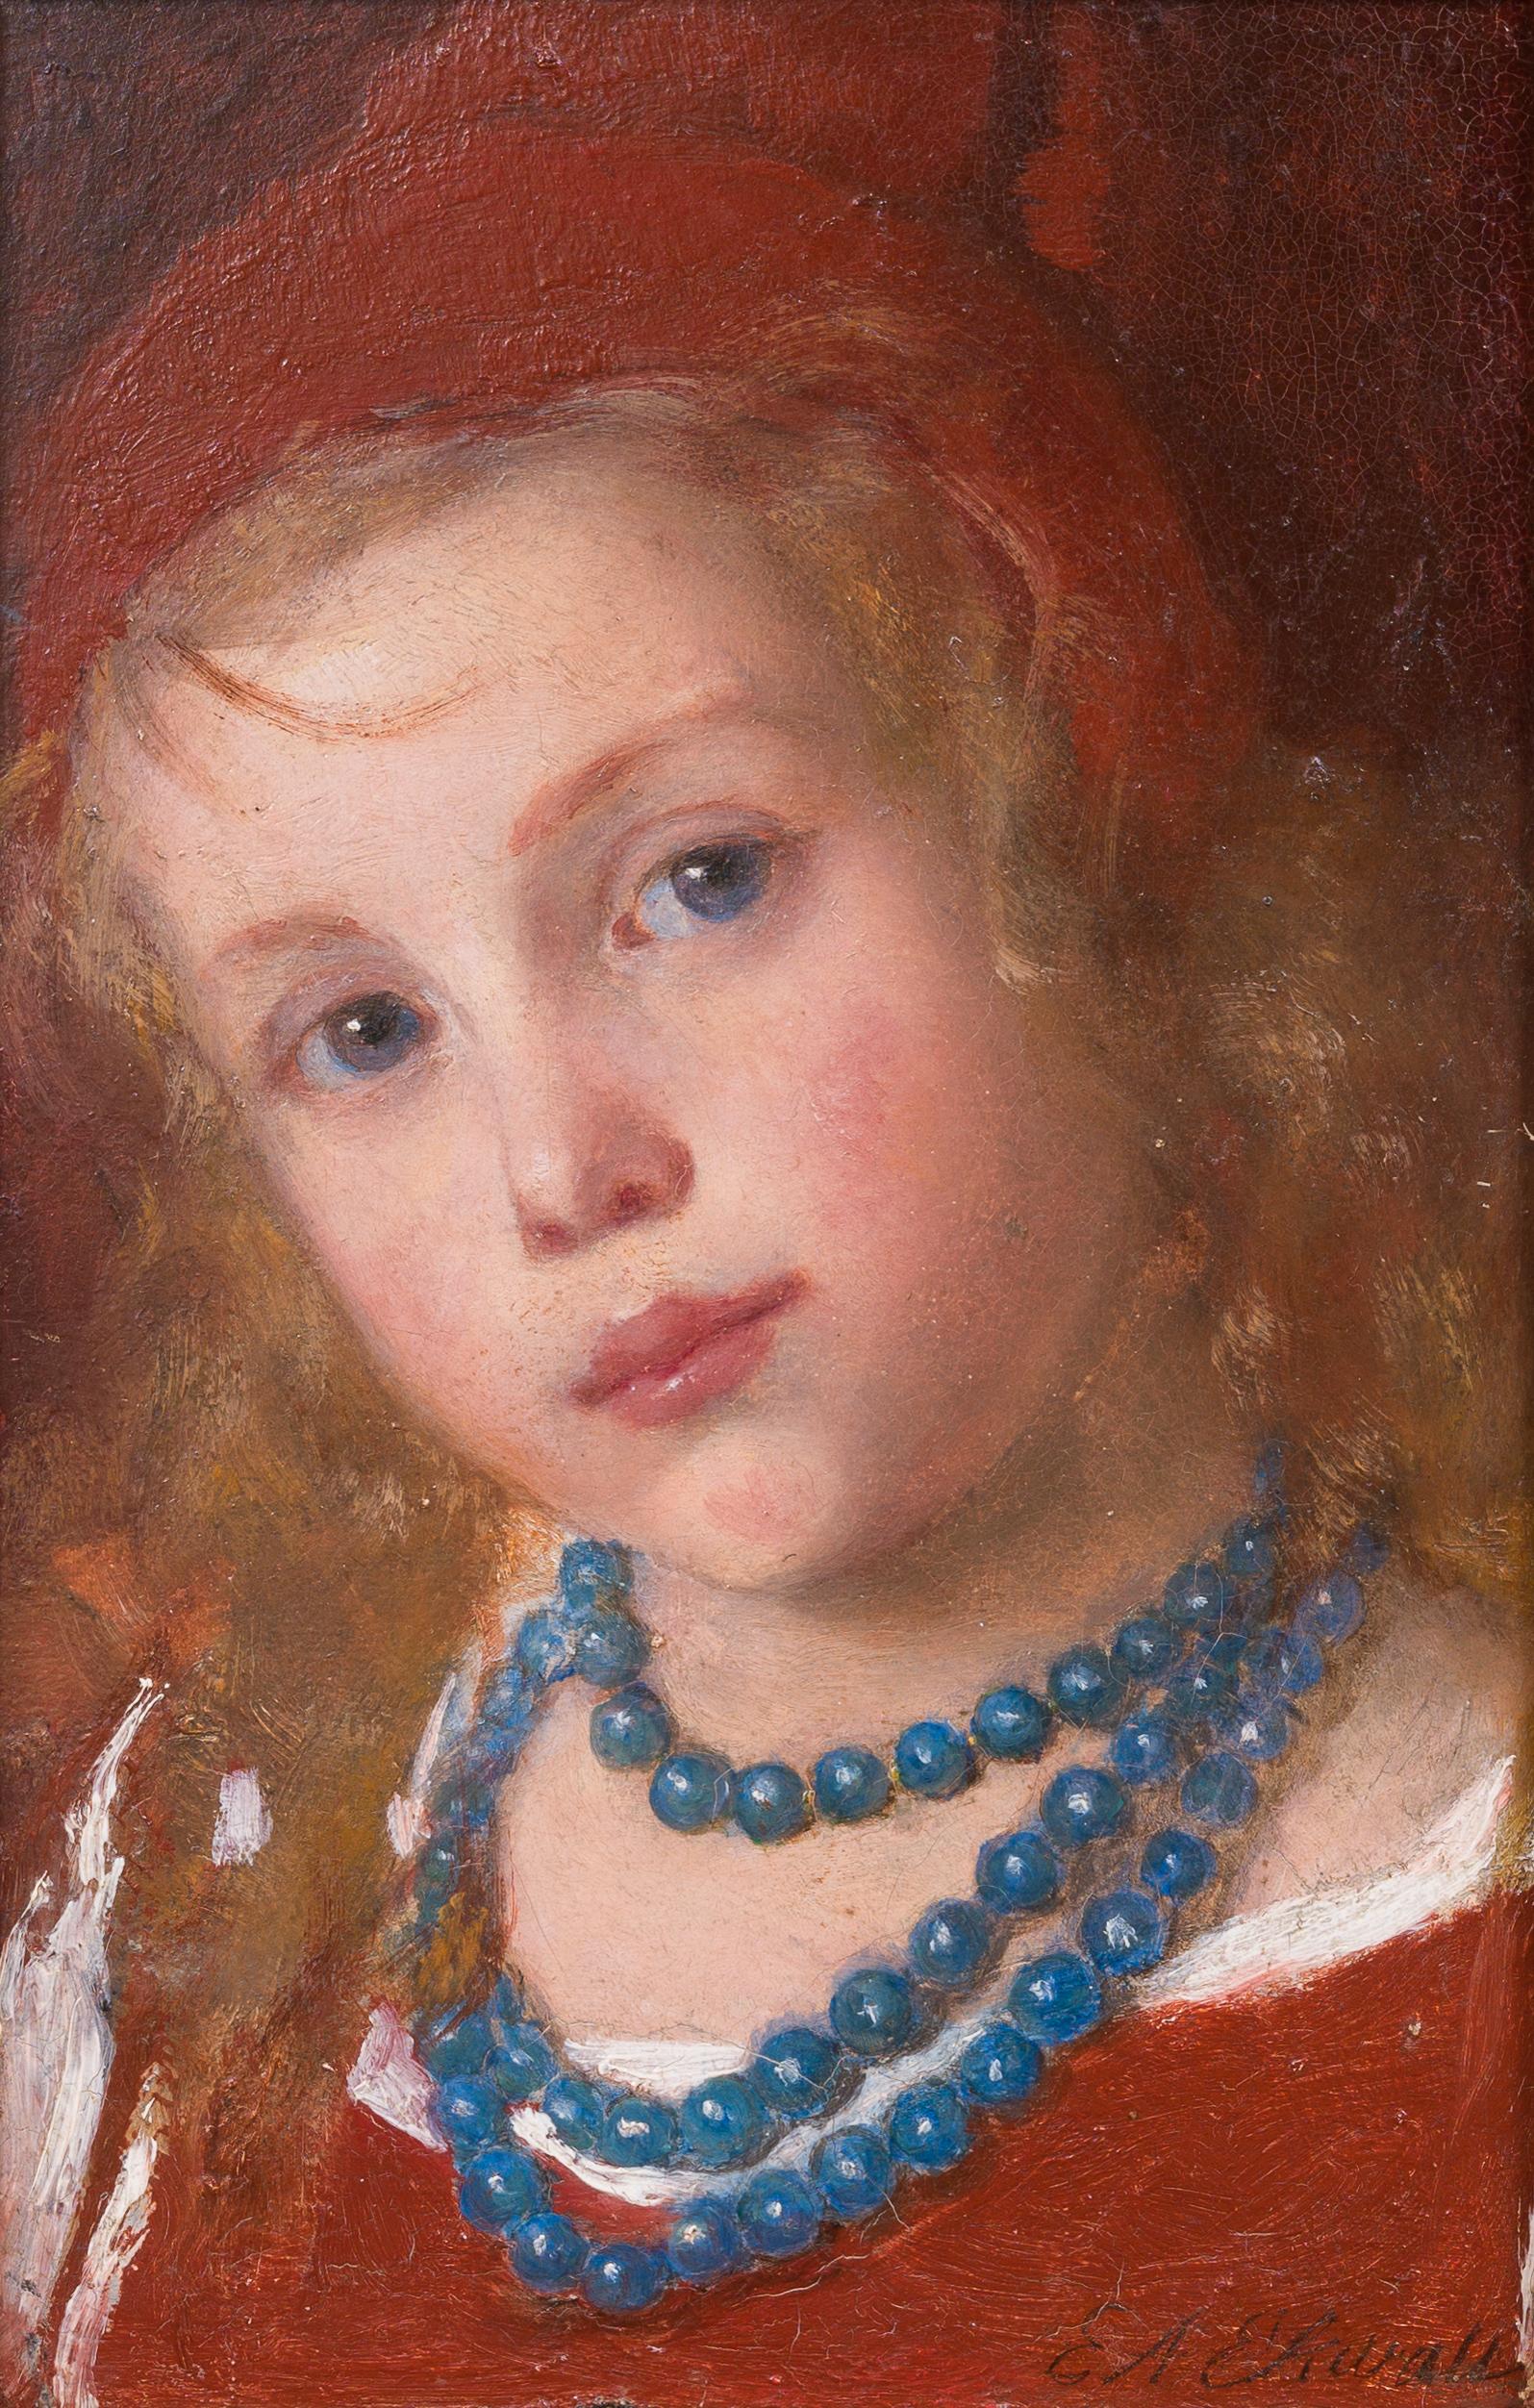 Portrait of a Girl With Blue Necklace by Swedish Artist Emma Ekwall 2